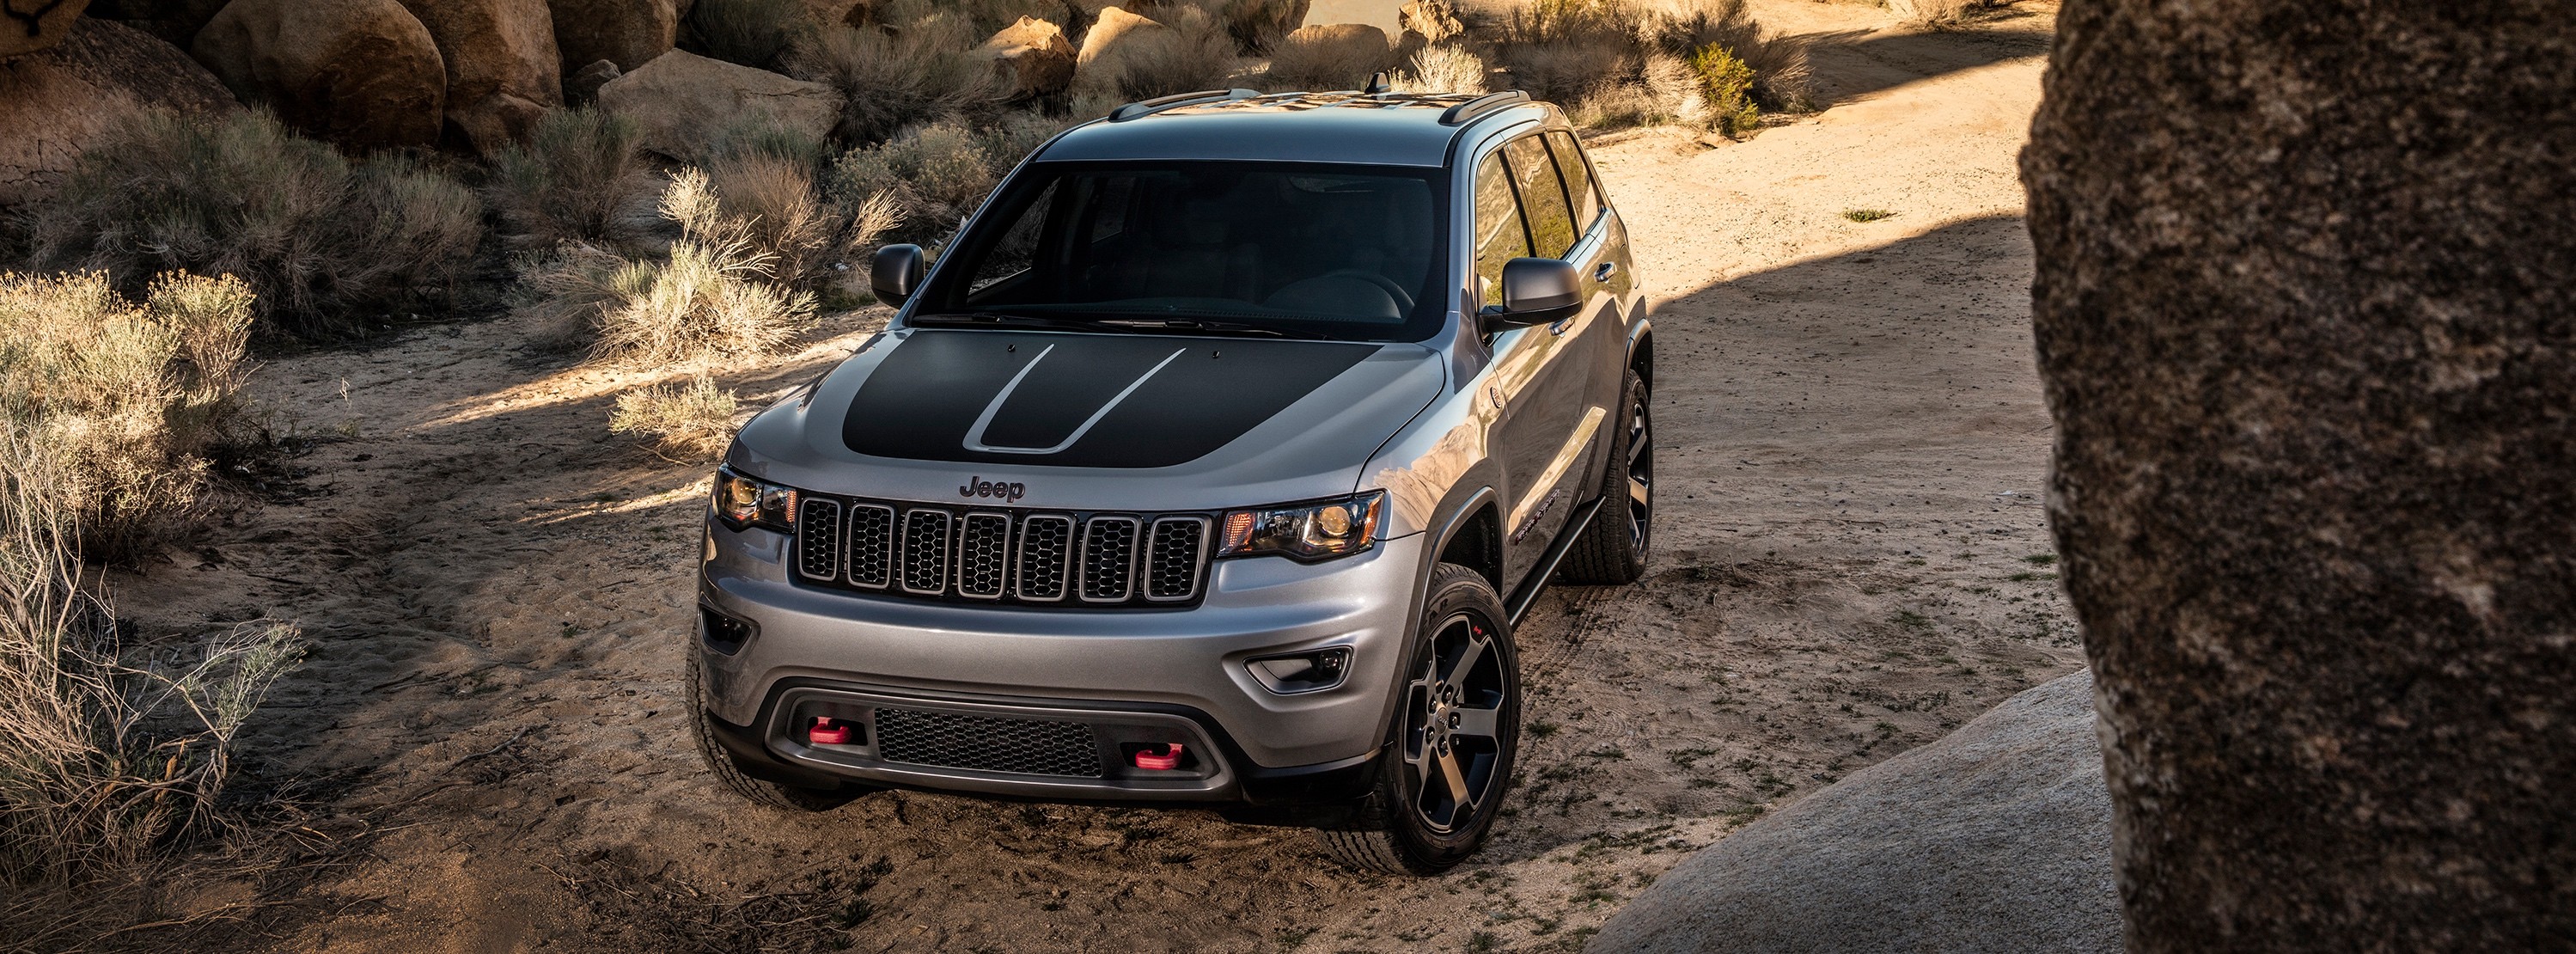 Jeep S Awd And 4wd Systems Explained Autoevolution